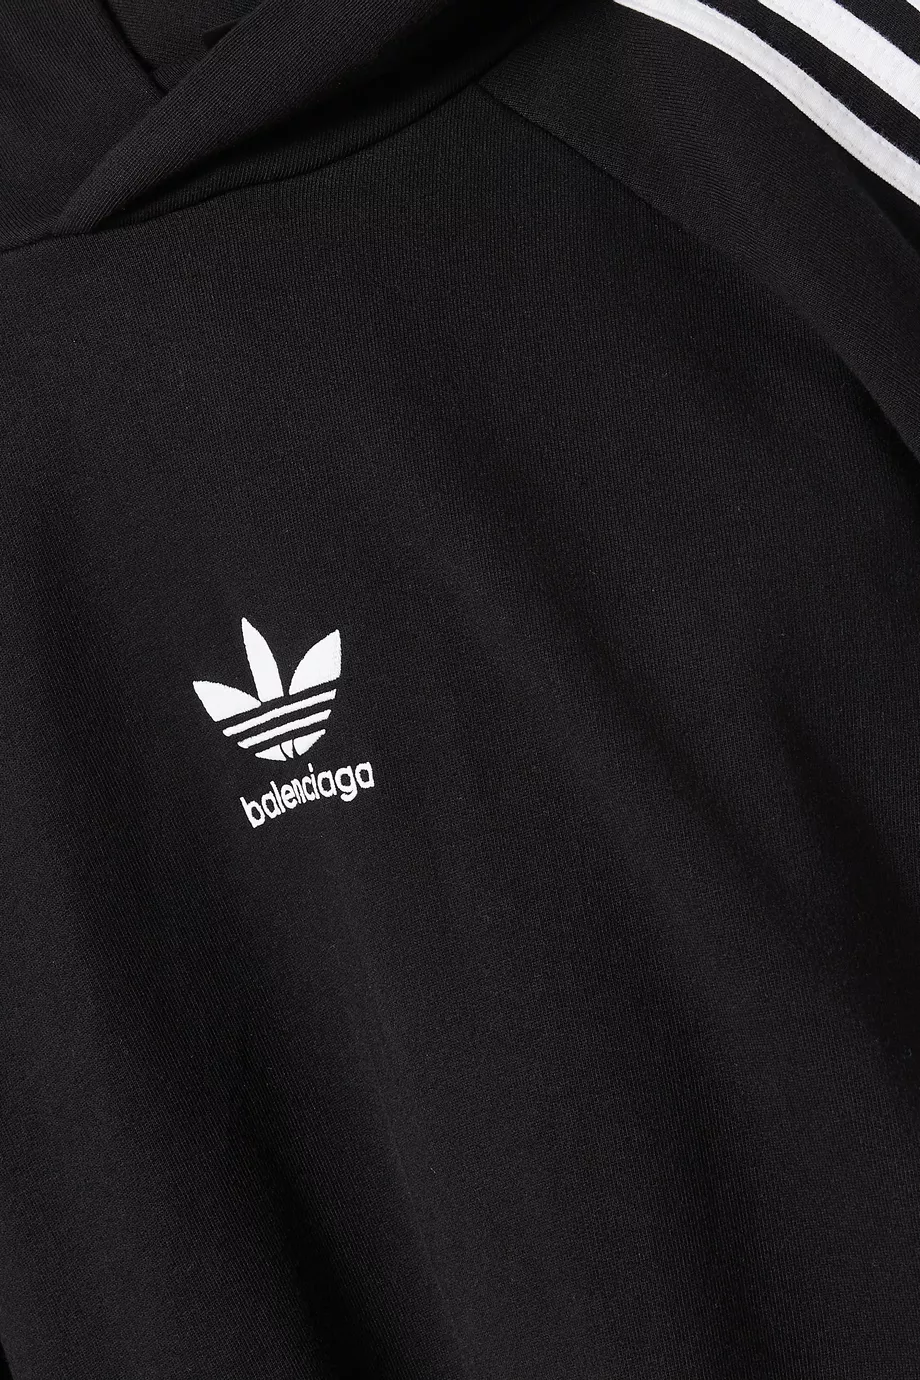 Buy Balenciaga Black x Adidas Large Fit Hoodie in Cotton Terry for